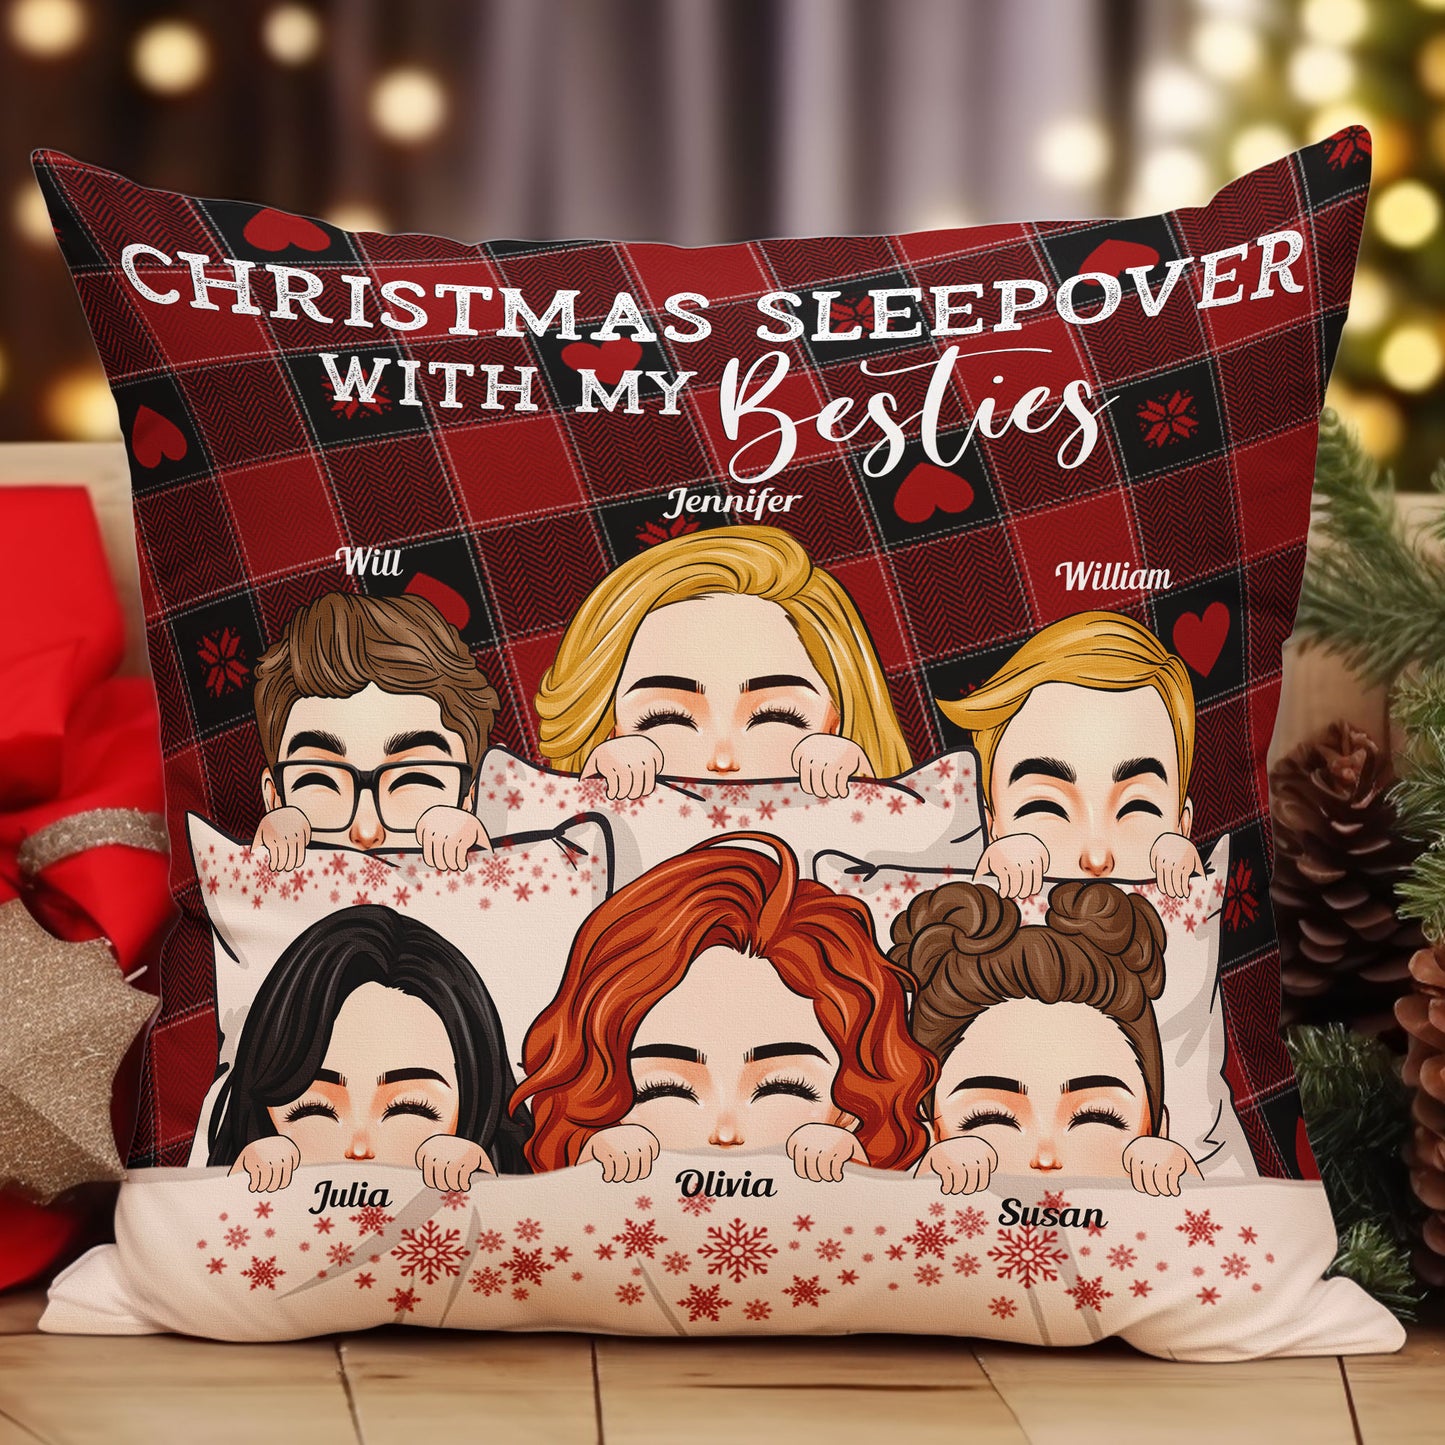 Liz Marie Blog - I shared my favorite pillow inserts over on the blog!!  Check it out here:  christmas-pillows/